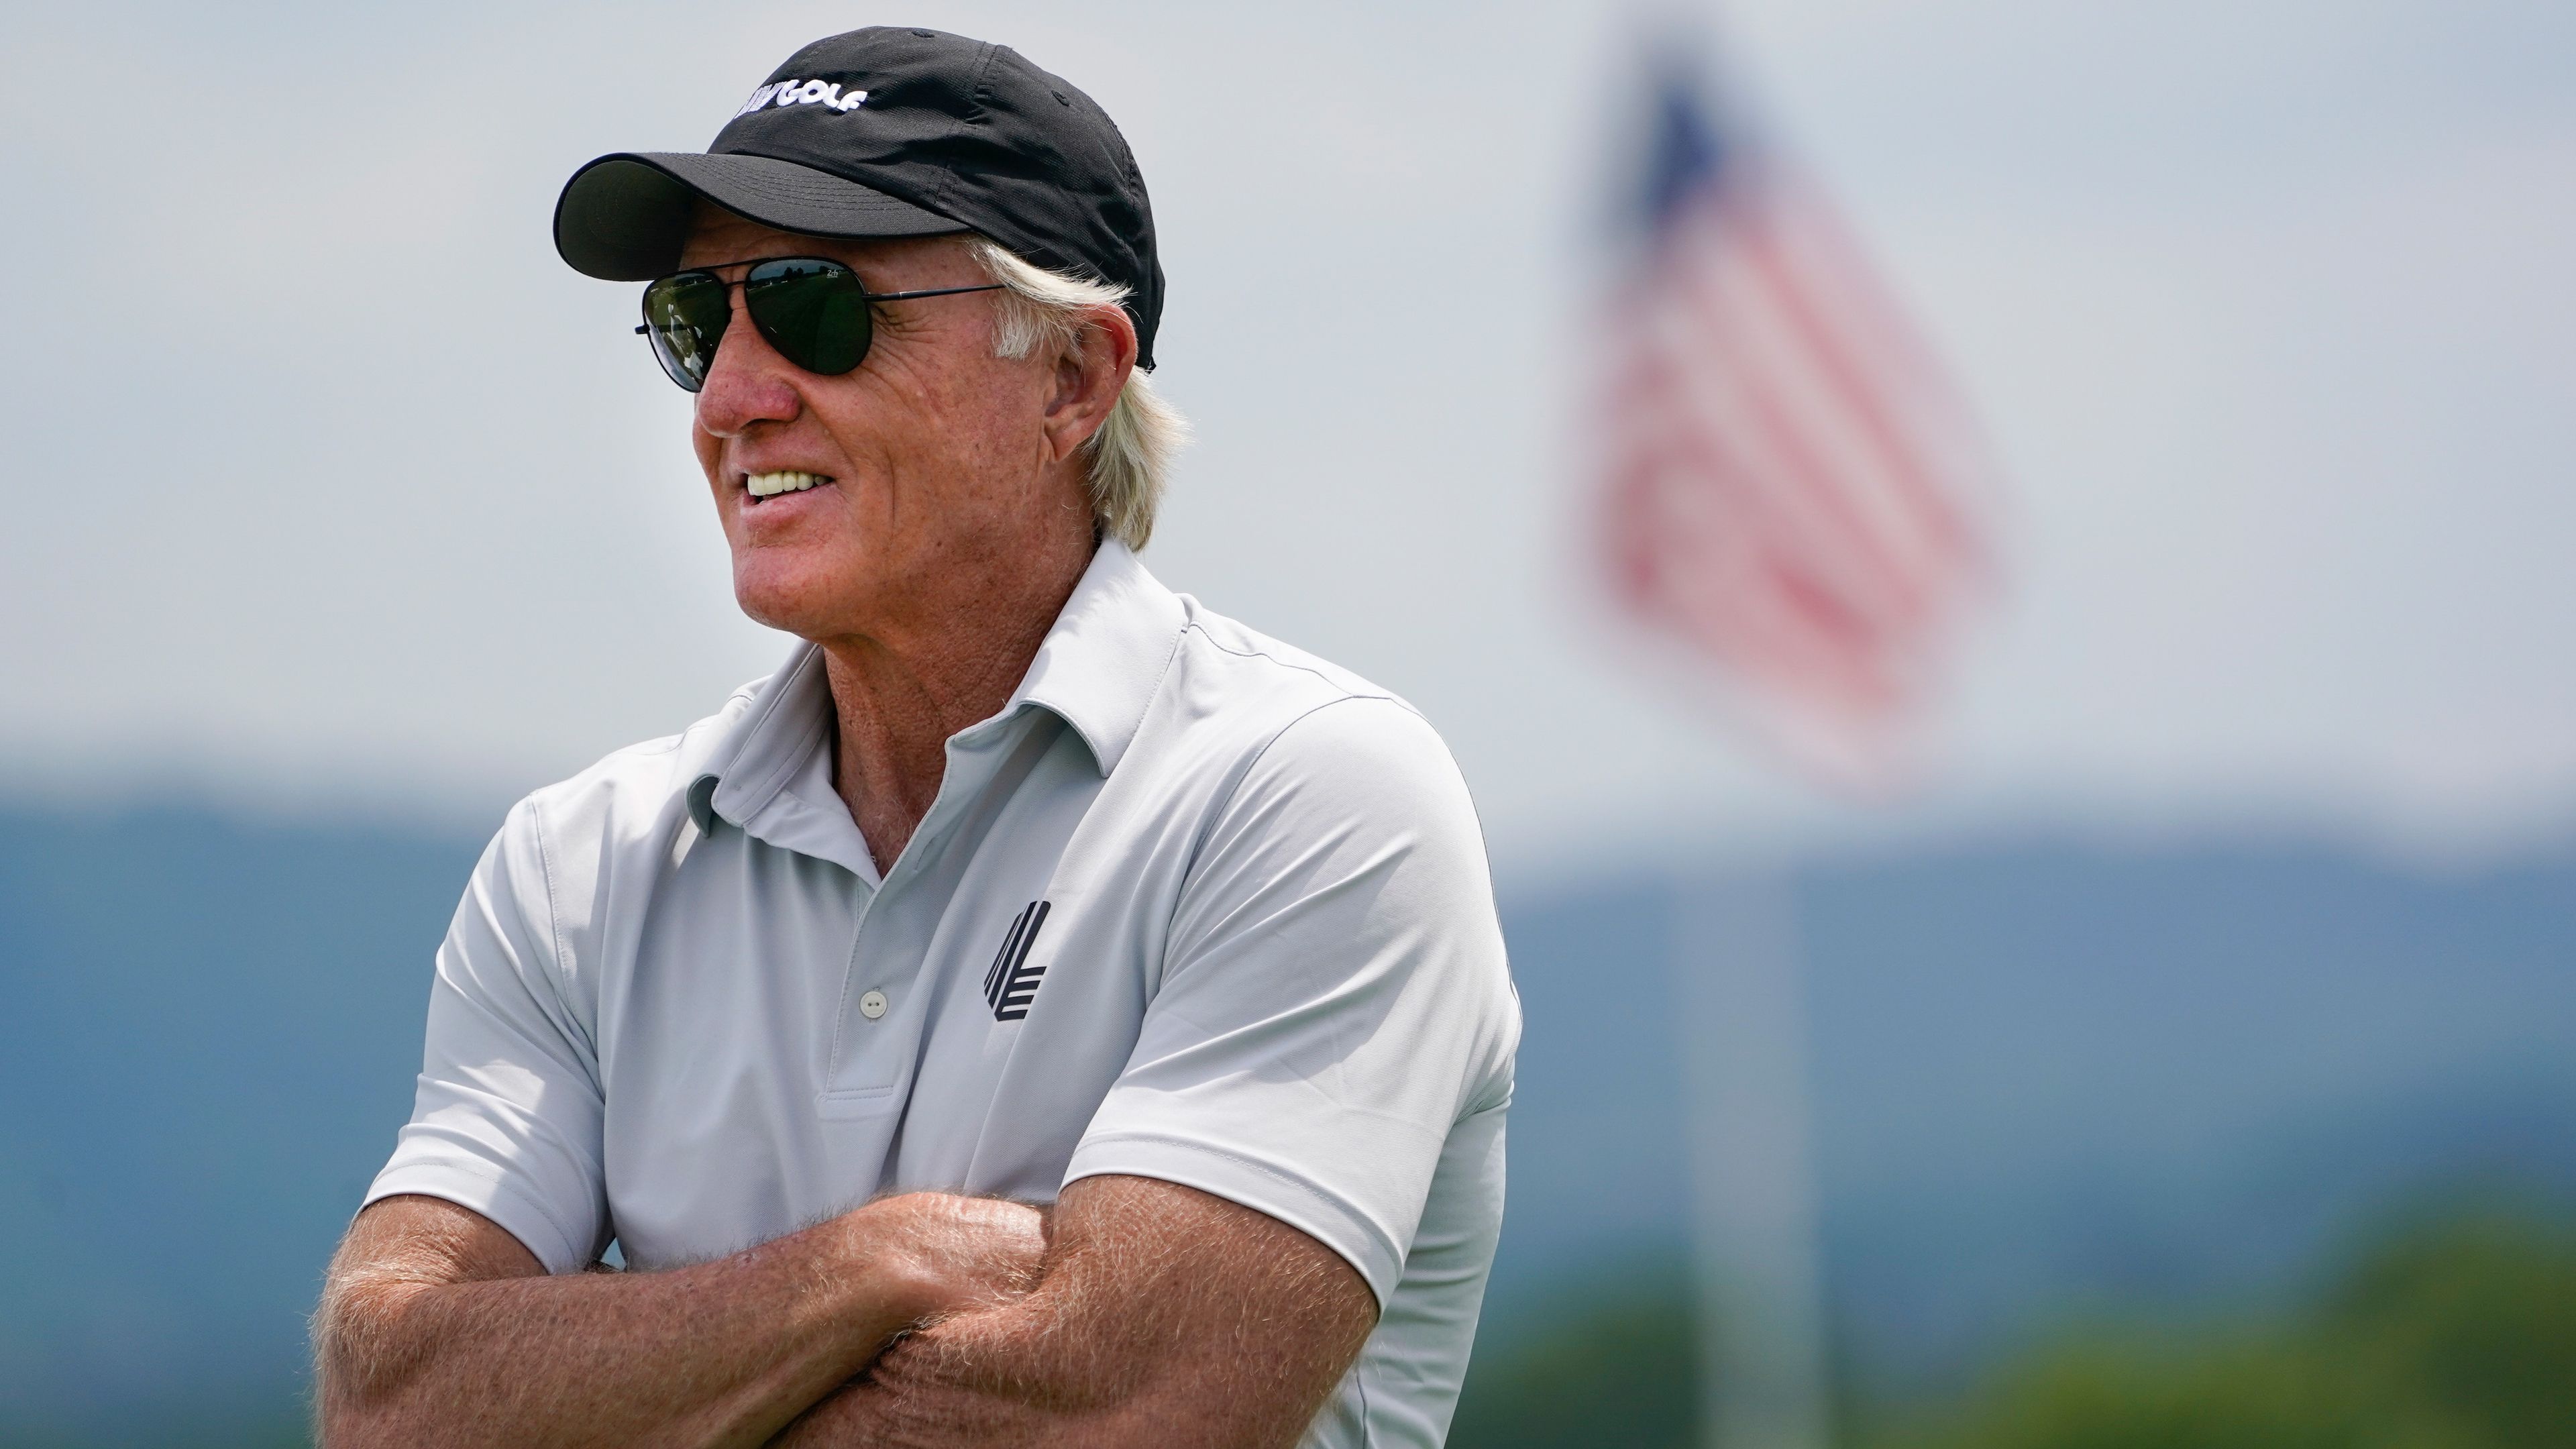 Greg Norman watches play during the pro-am round of the Bedminster Invitational LIV Golf tournament. (AP Photo/Seth Wenig)